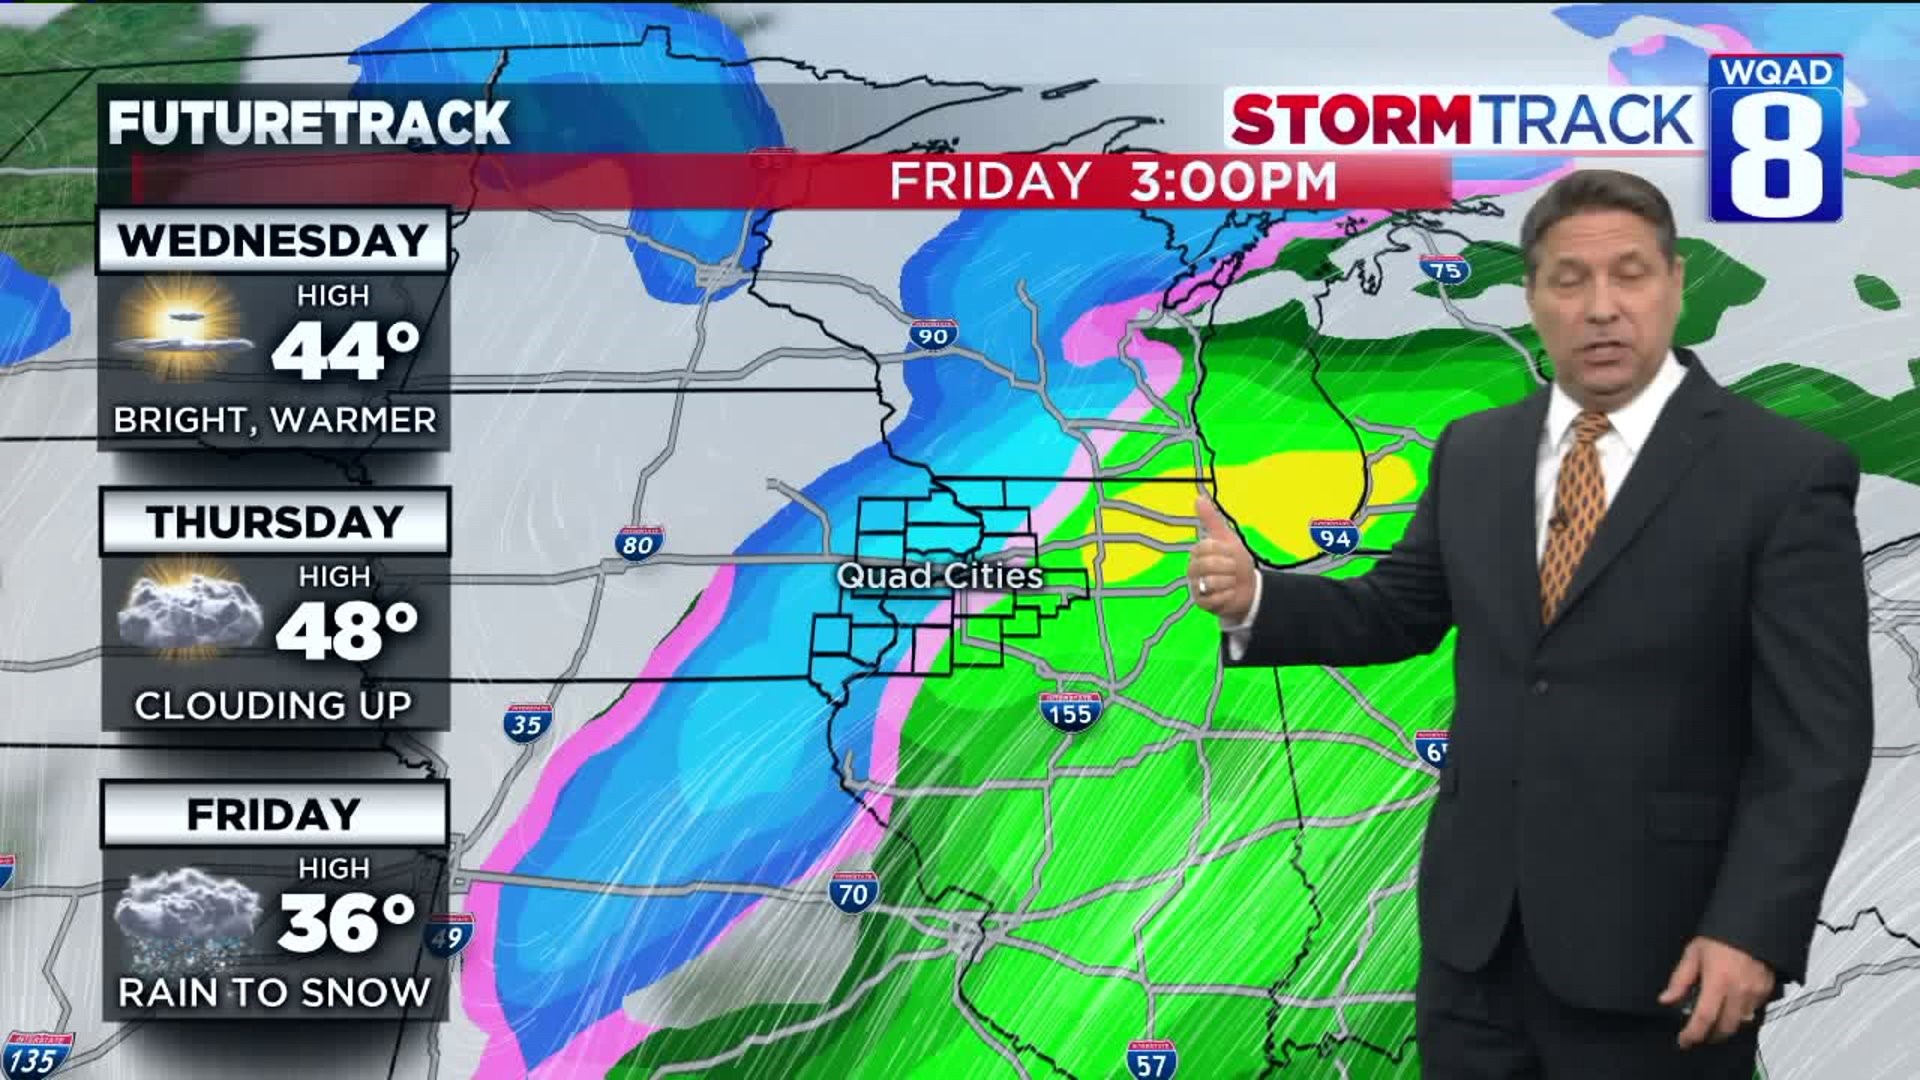 James tracking another system later this week